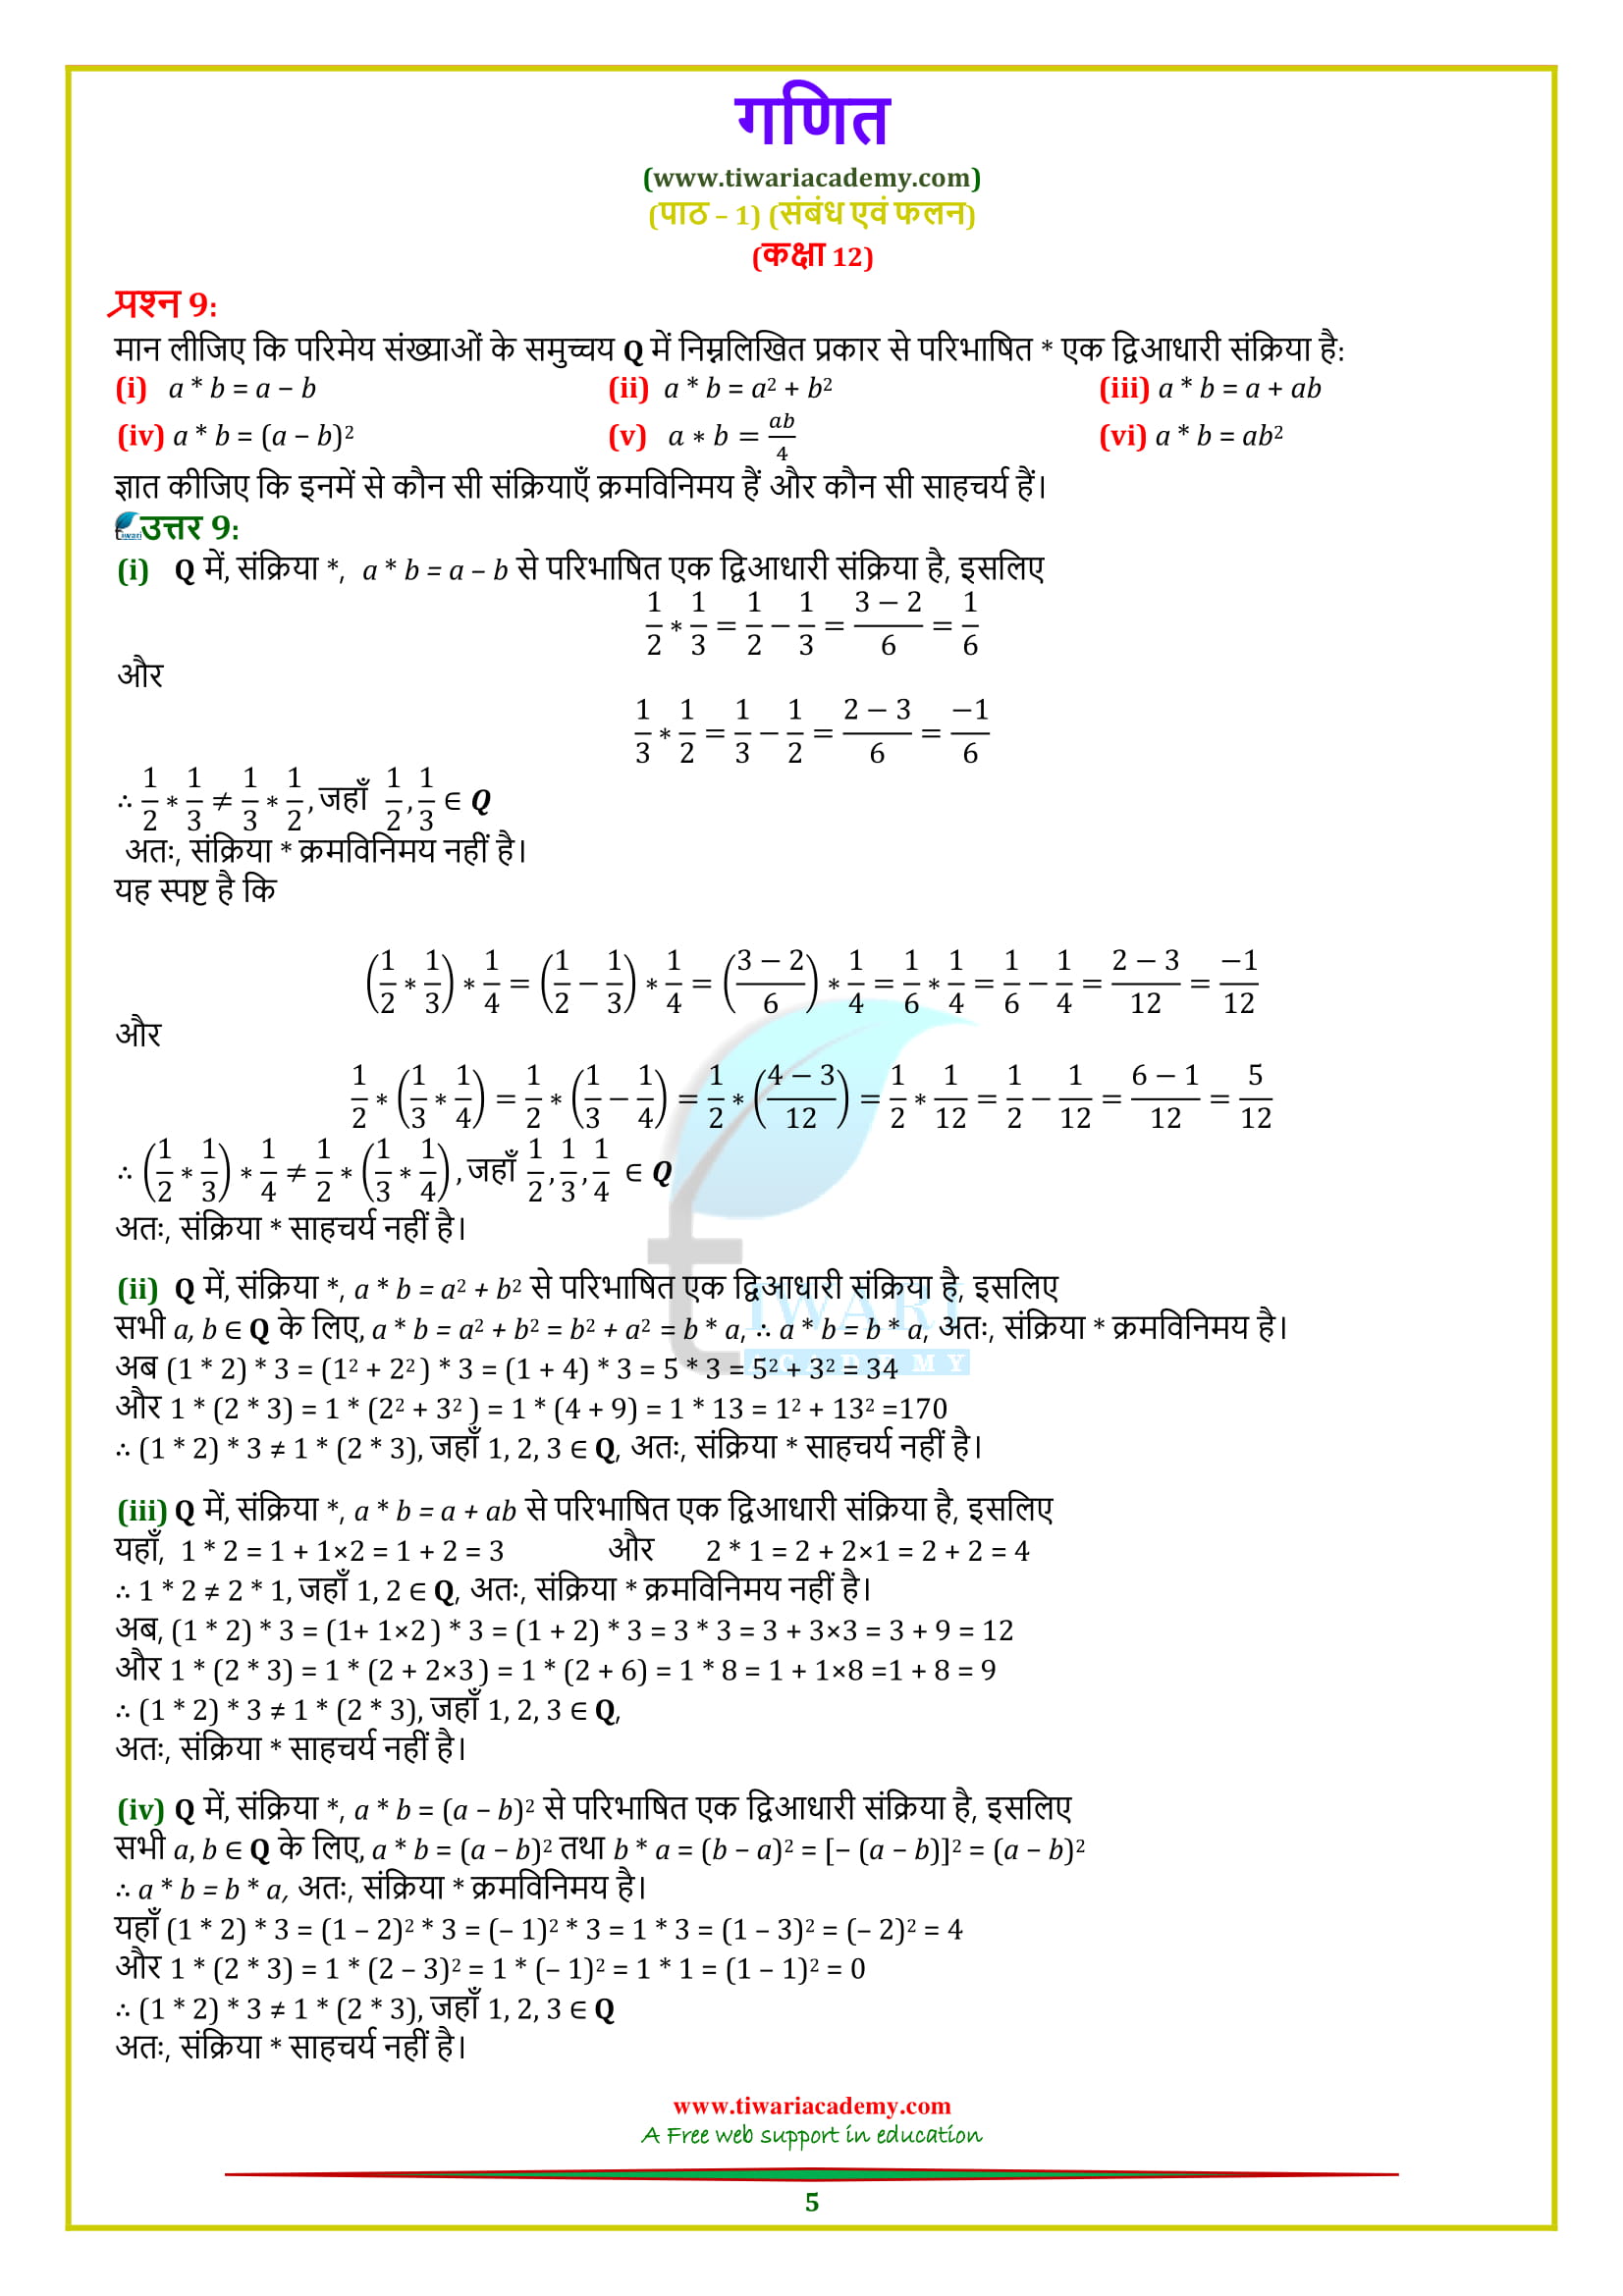 12 Maths Chapter 1 Exercise 1.4 sols in hindi for 2018-19.